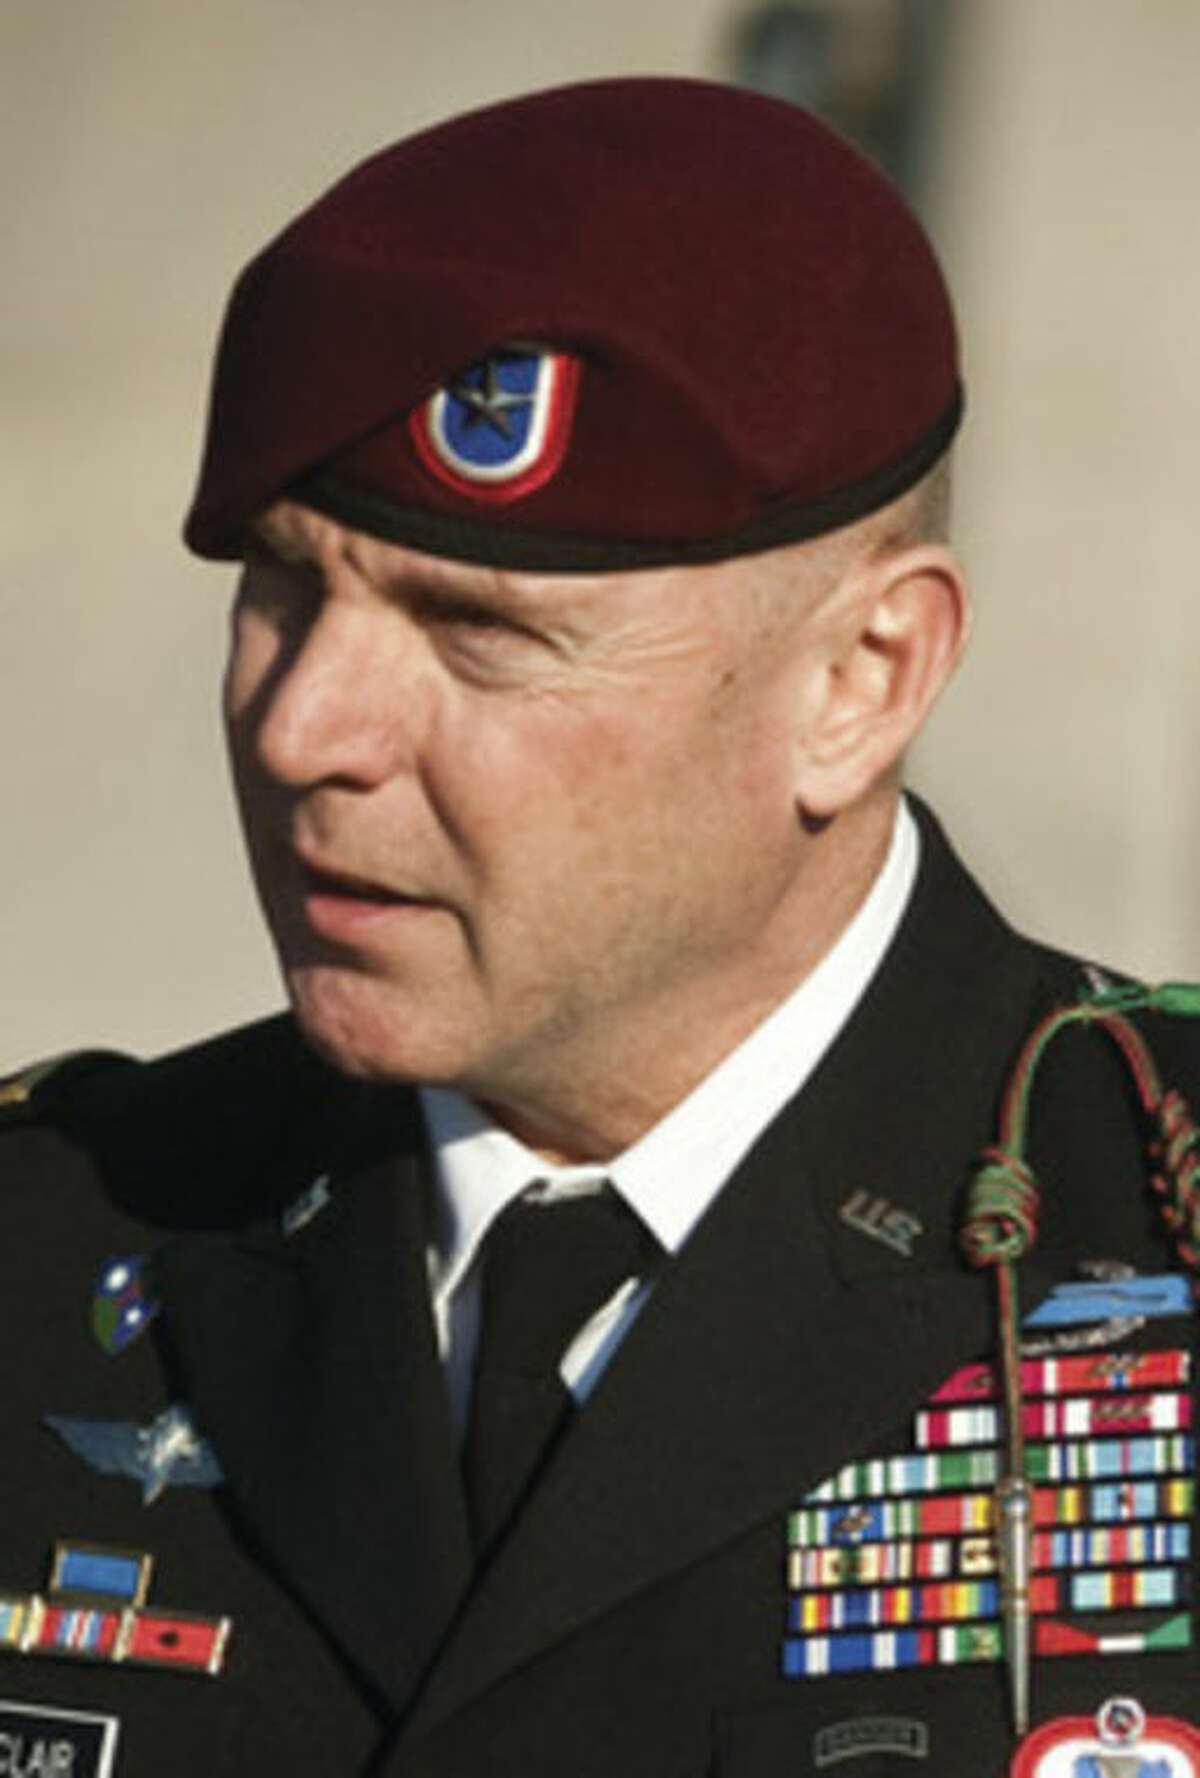 Rapid Fall For Army General Accused Of Sex Crimes